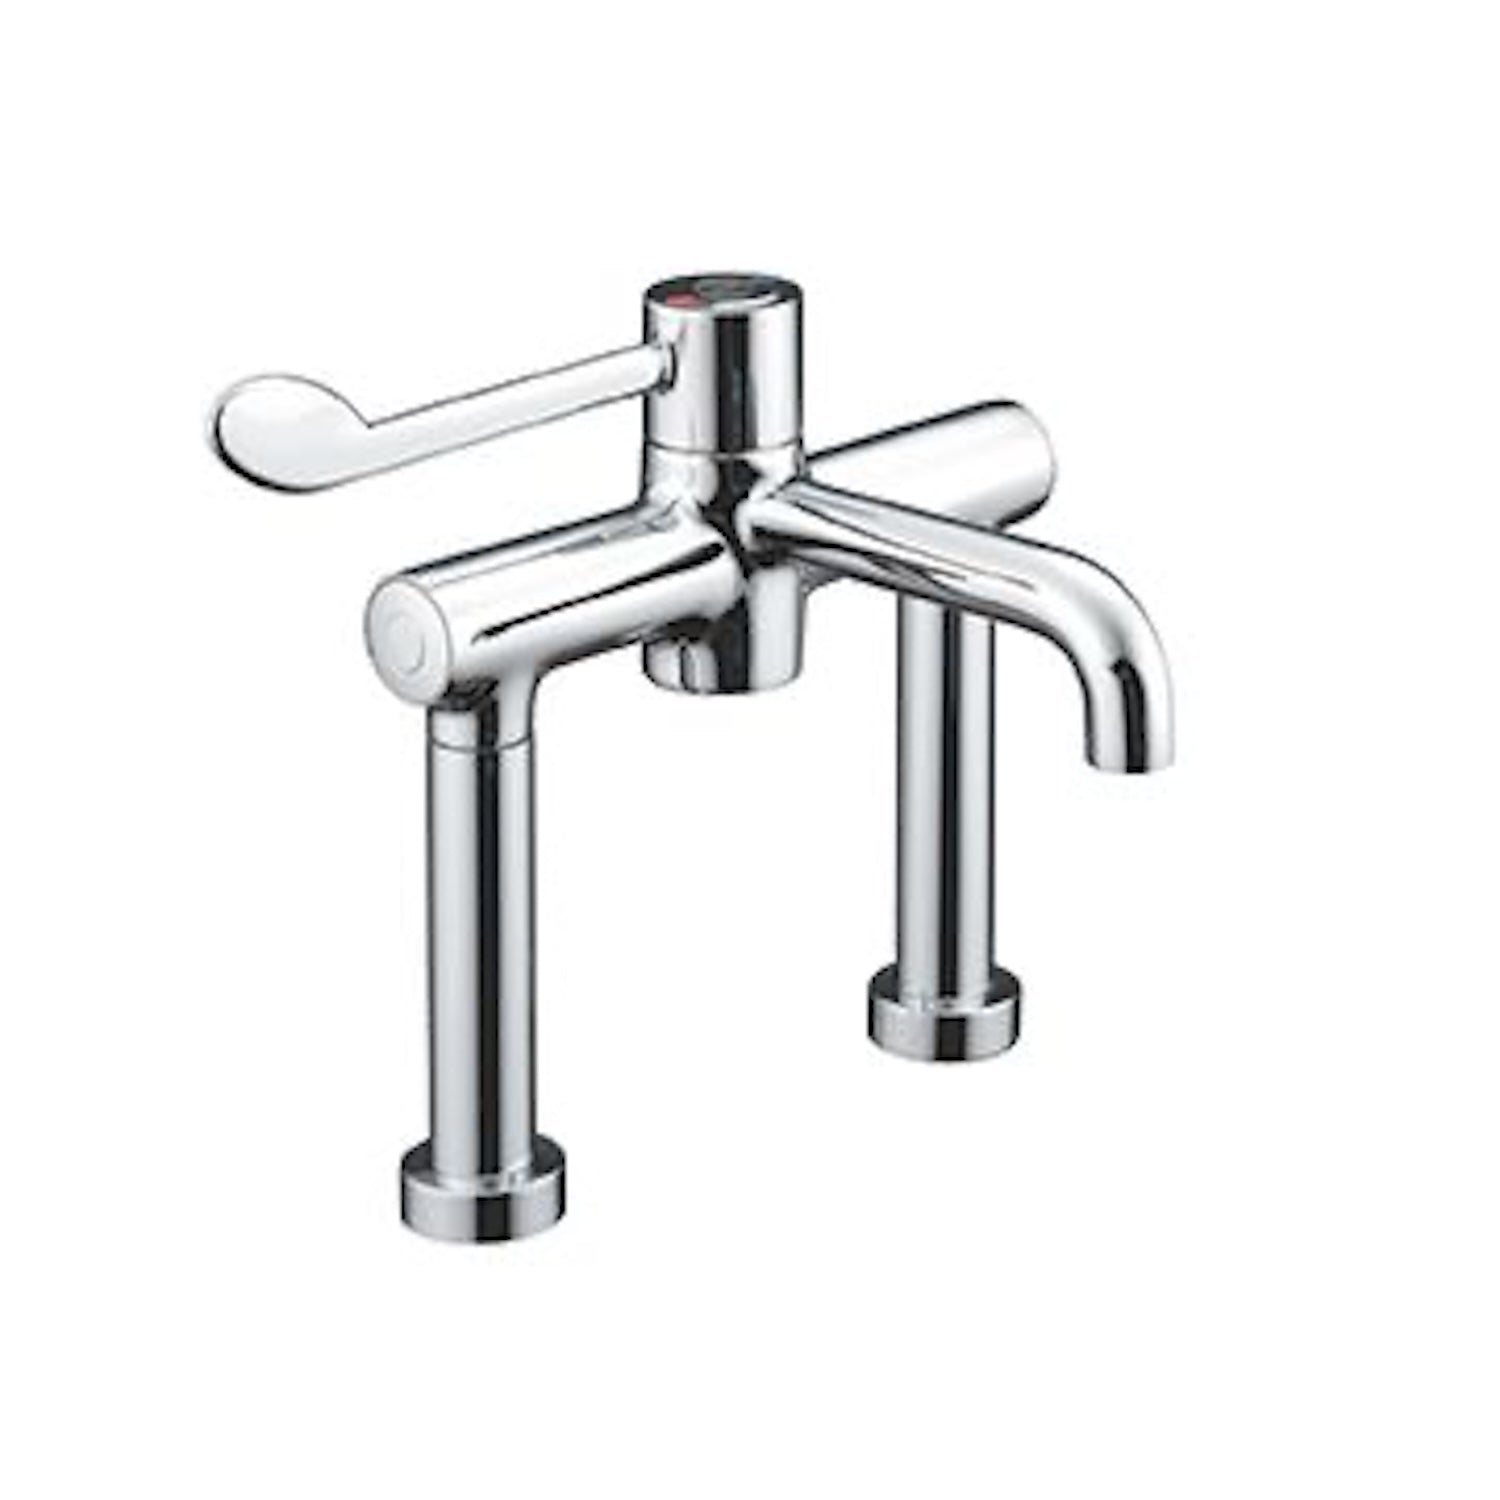 Sunflower Htm64 Compliant Deck Mounted Sequential Thermostatic Mixer Tap With Time Flow Sensor